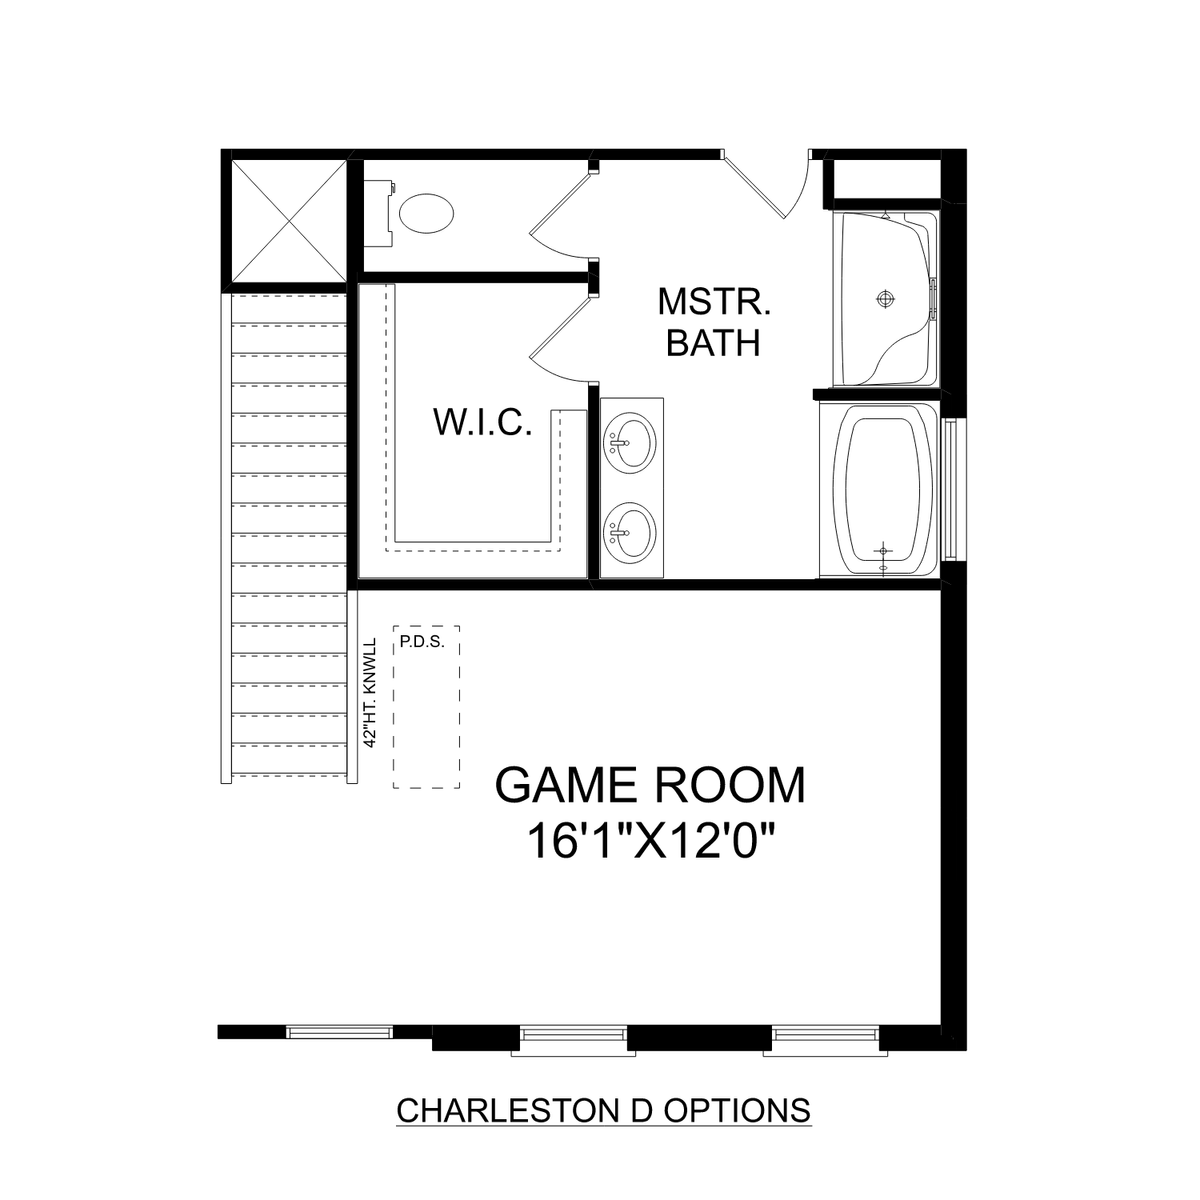 3 - The Charleston D buildable floor plan layout in Davidson Homes' Williams Pointe community.